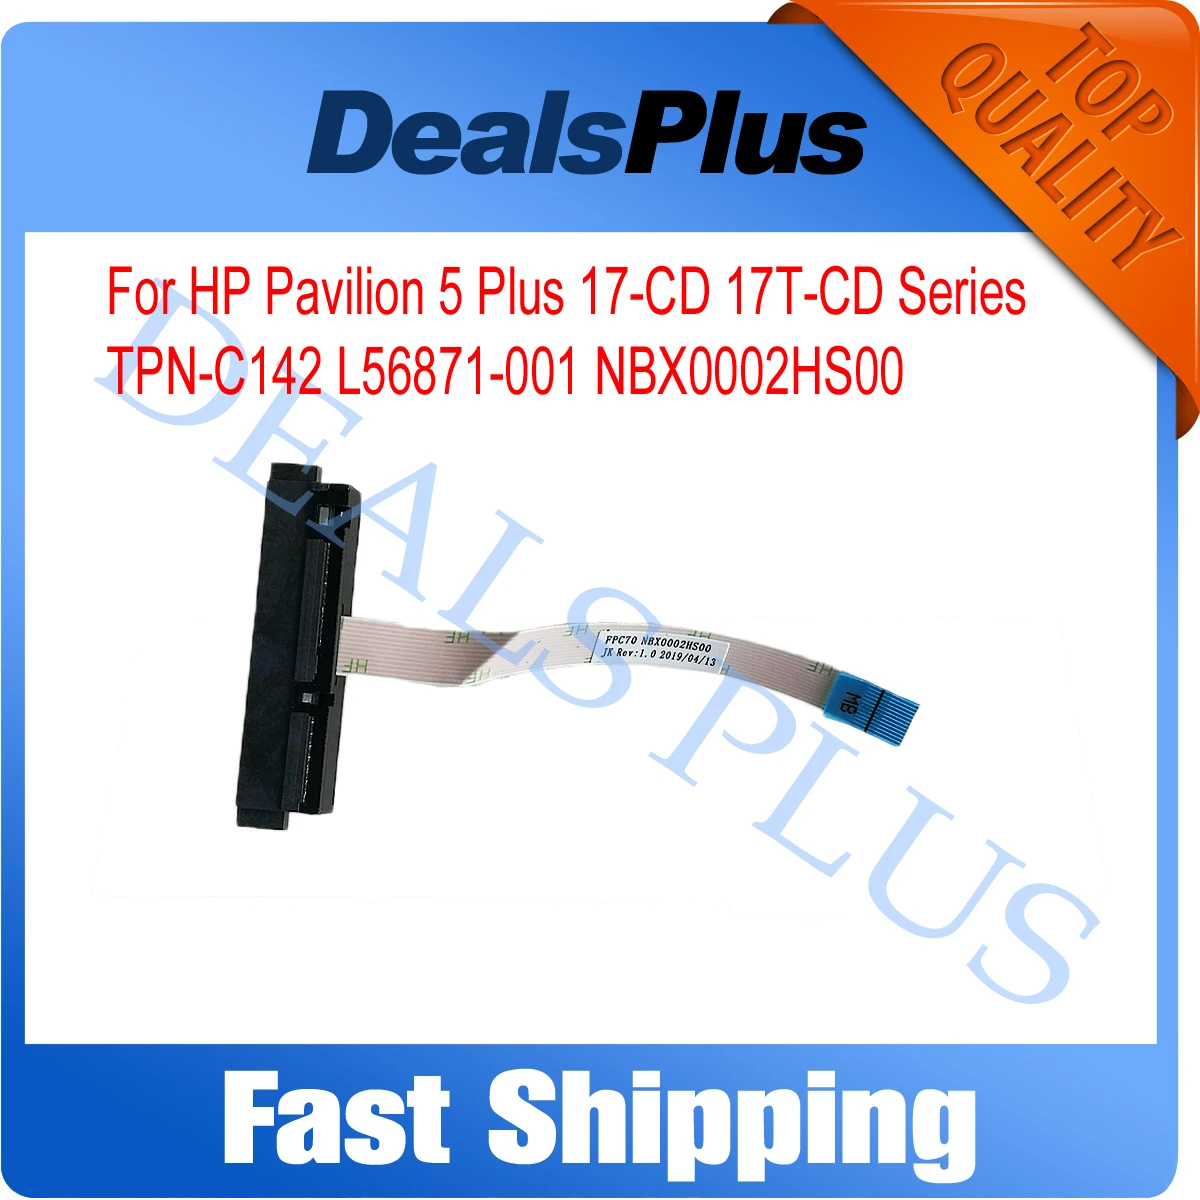 

New Replacement SATA Hard Drive HDD SSD Connector Flex Cable For HP Pavilion 5 Plus 17-CD 17T-CD TPN-C142 L56871-001 NBX0002HS00